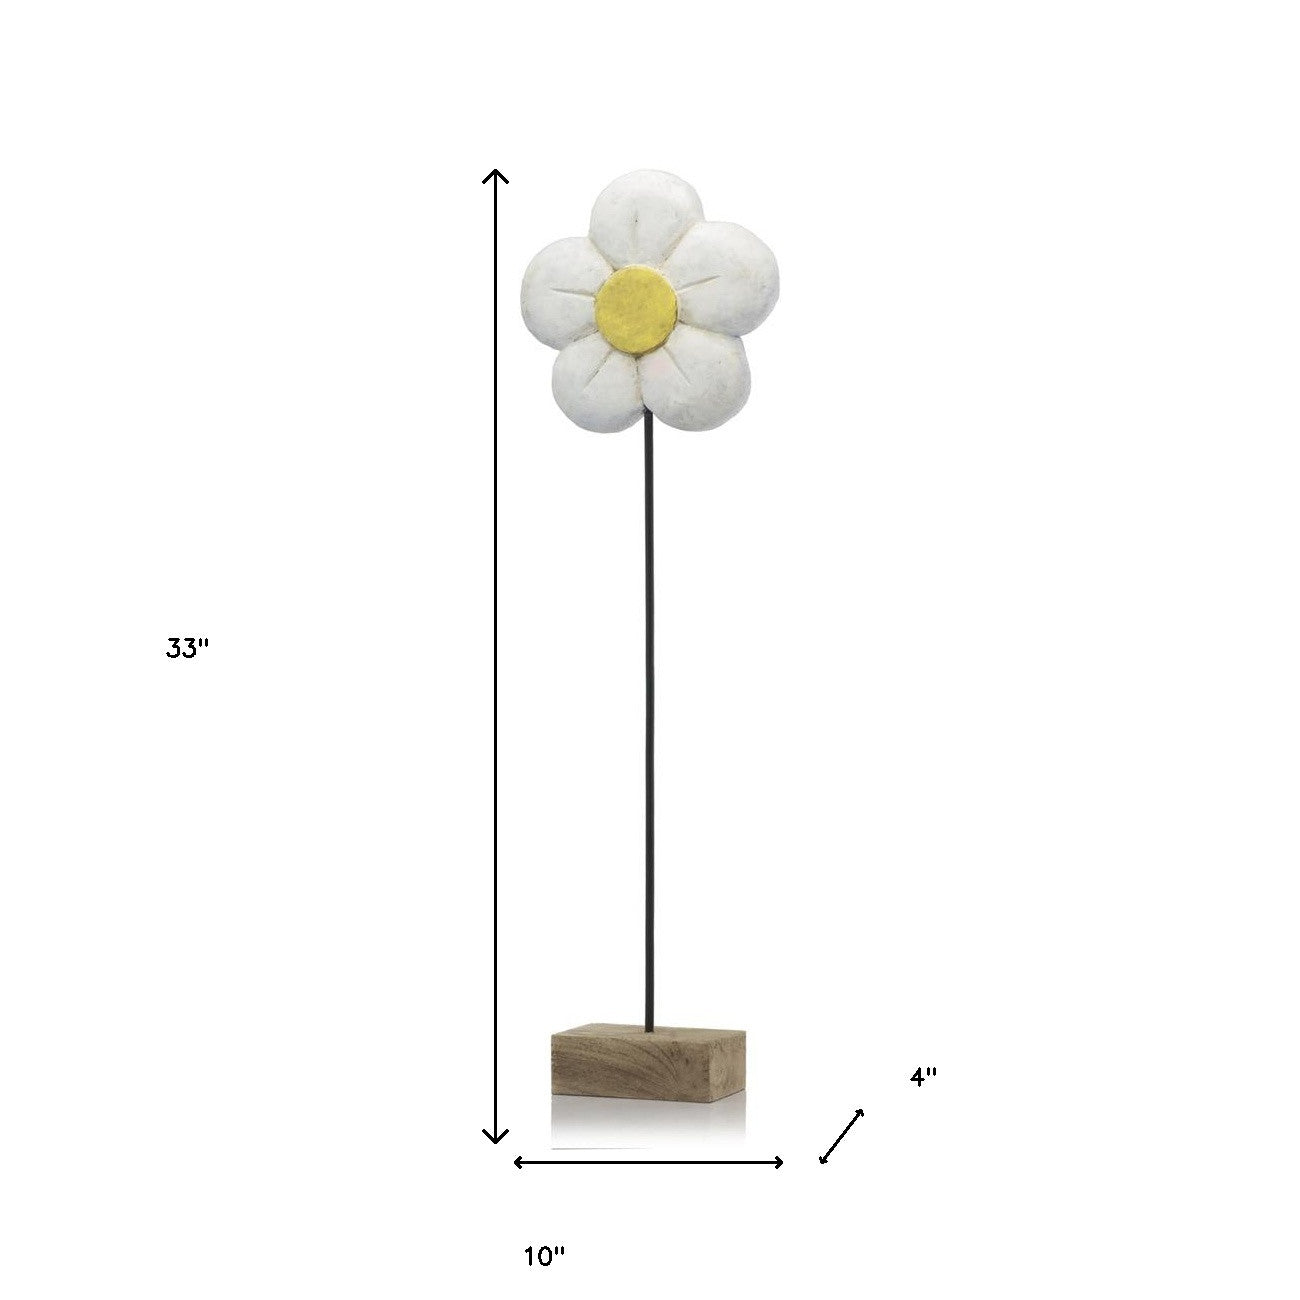 4" X 10" X 33" Natural And Black White Tall Daisy On Stand